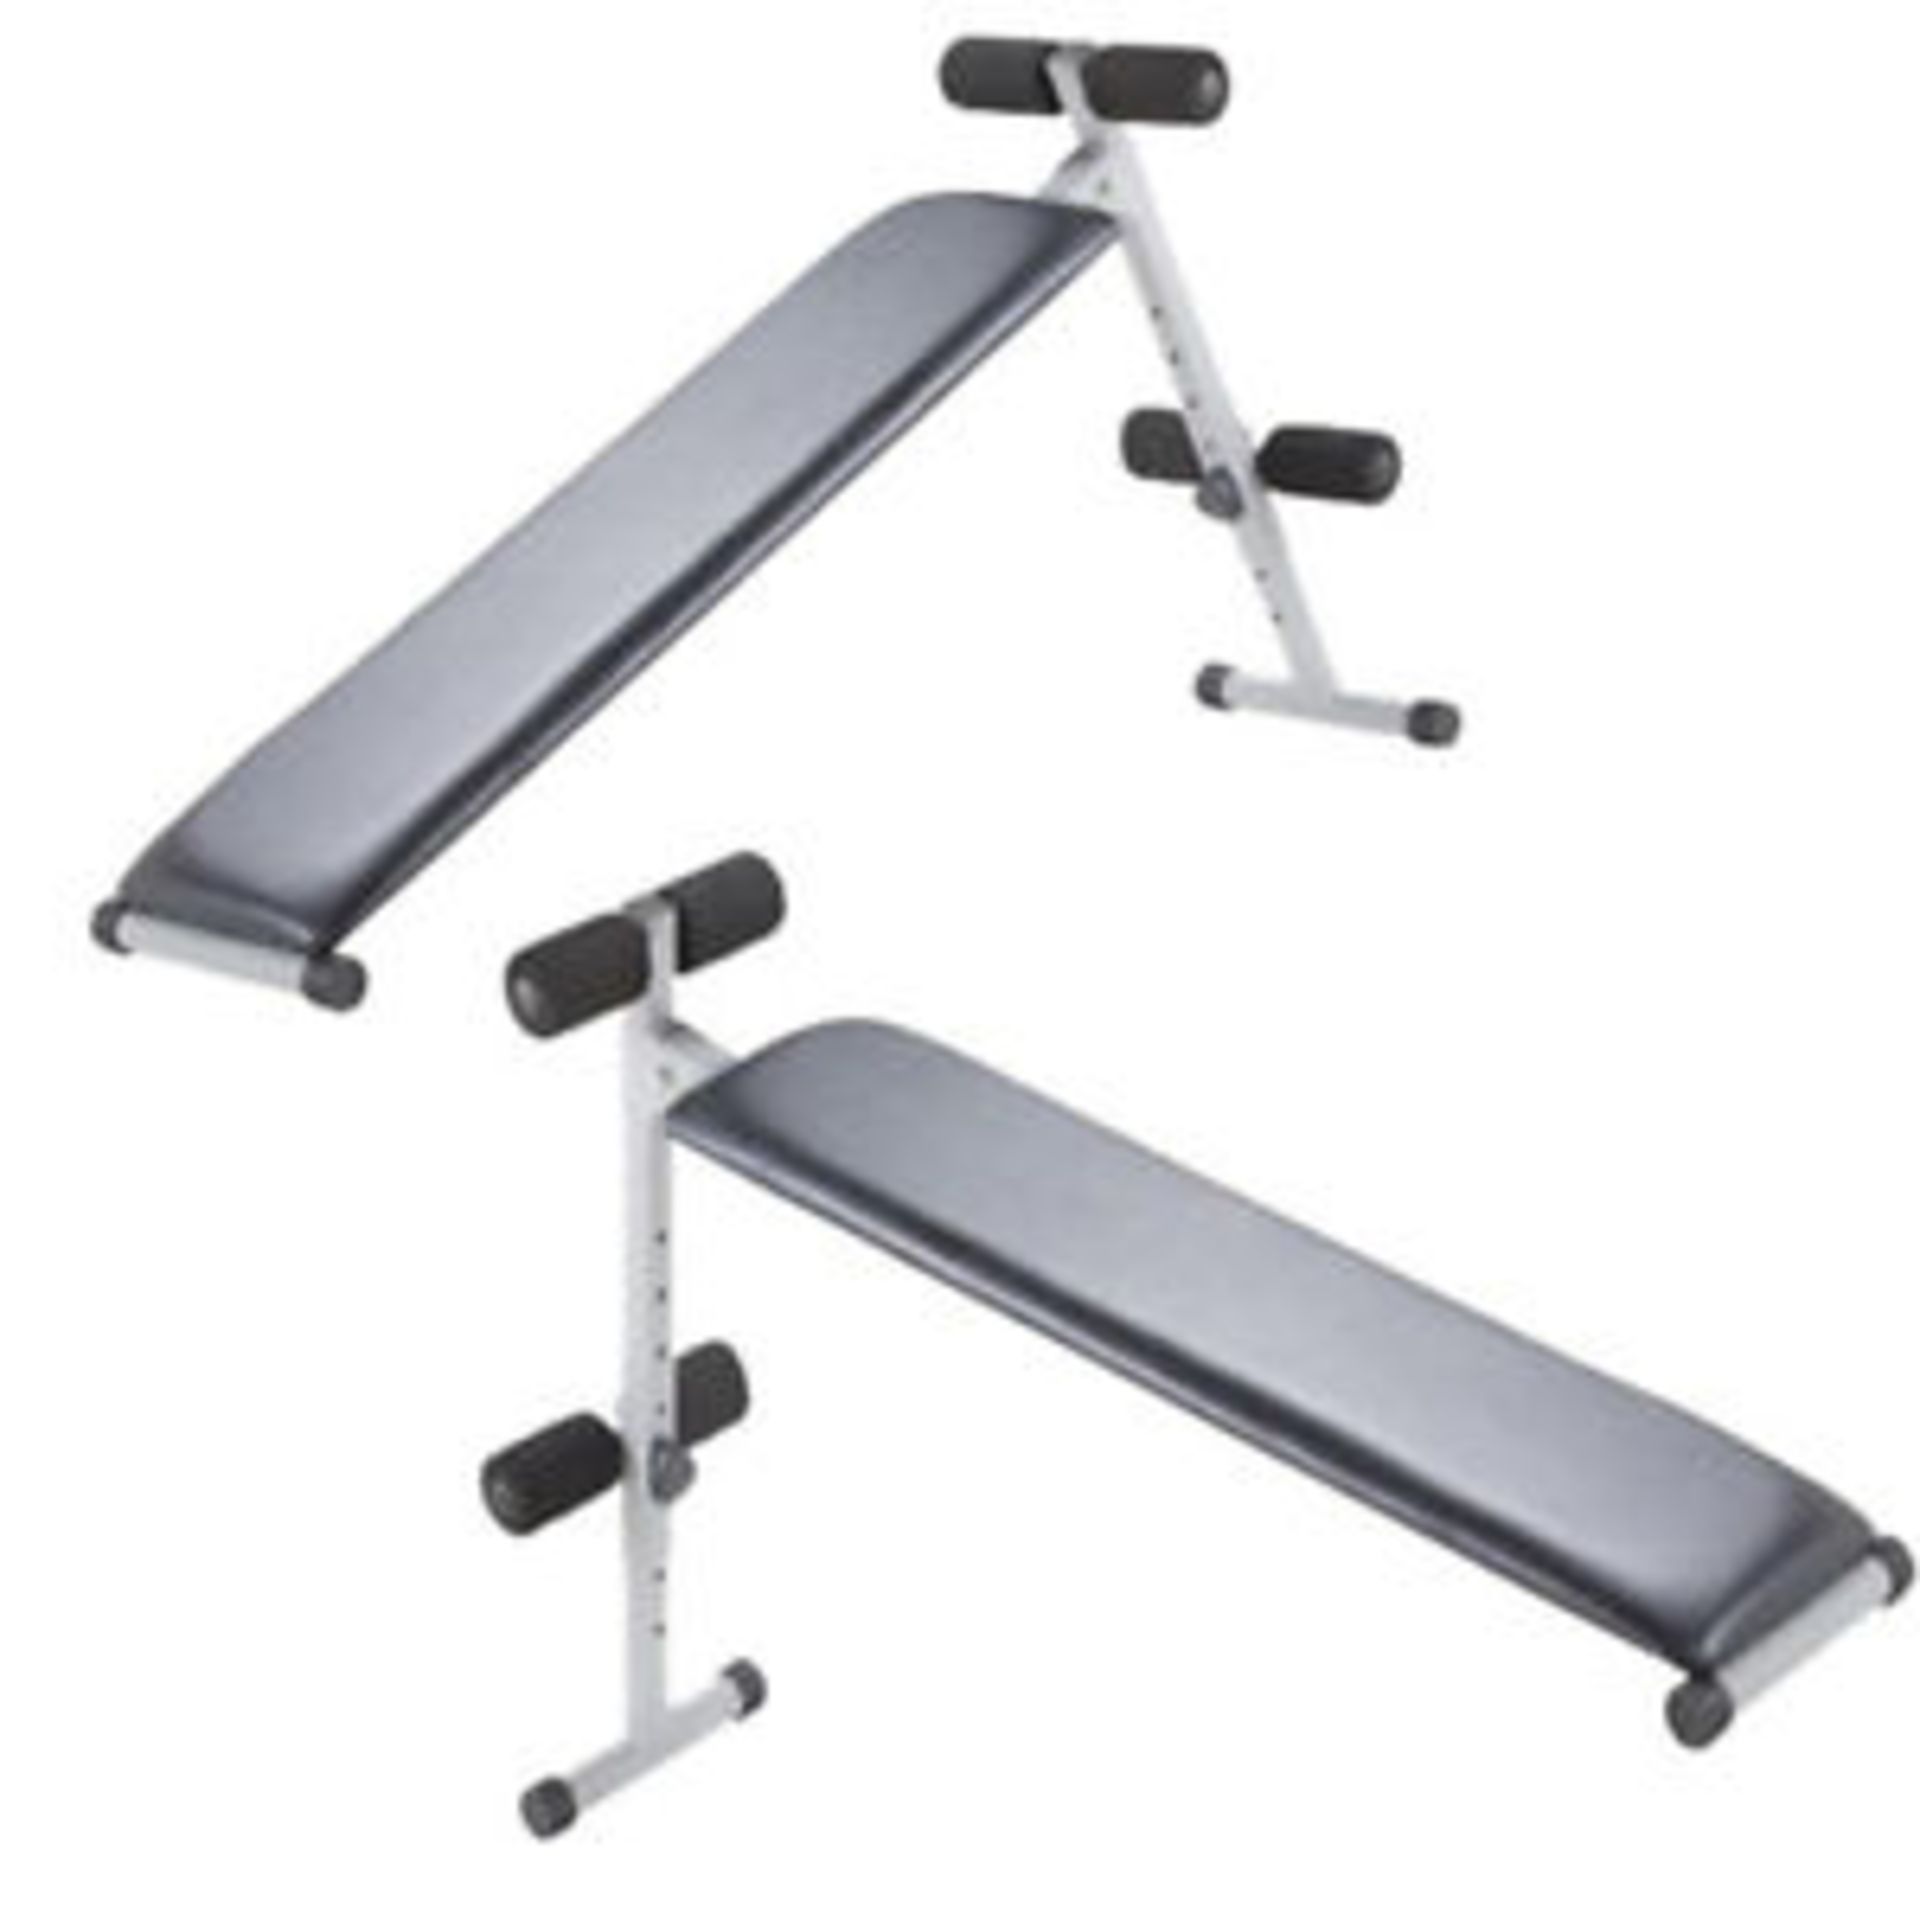 V Brand New 2 in 1 Incline/Sit Up Bench - Tesco Price £35.00 - Image 2 of 3